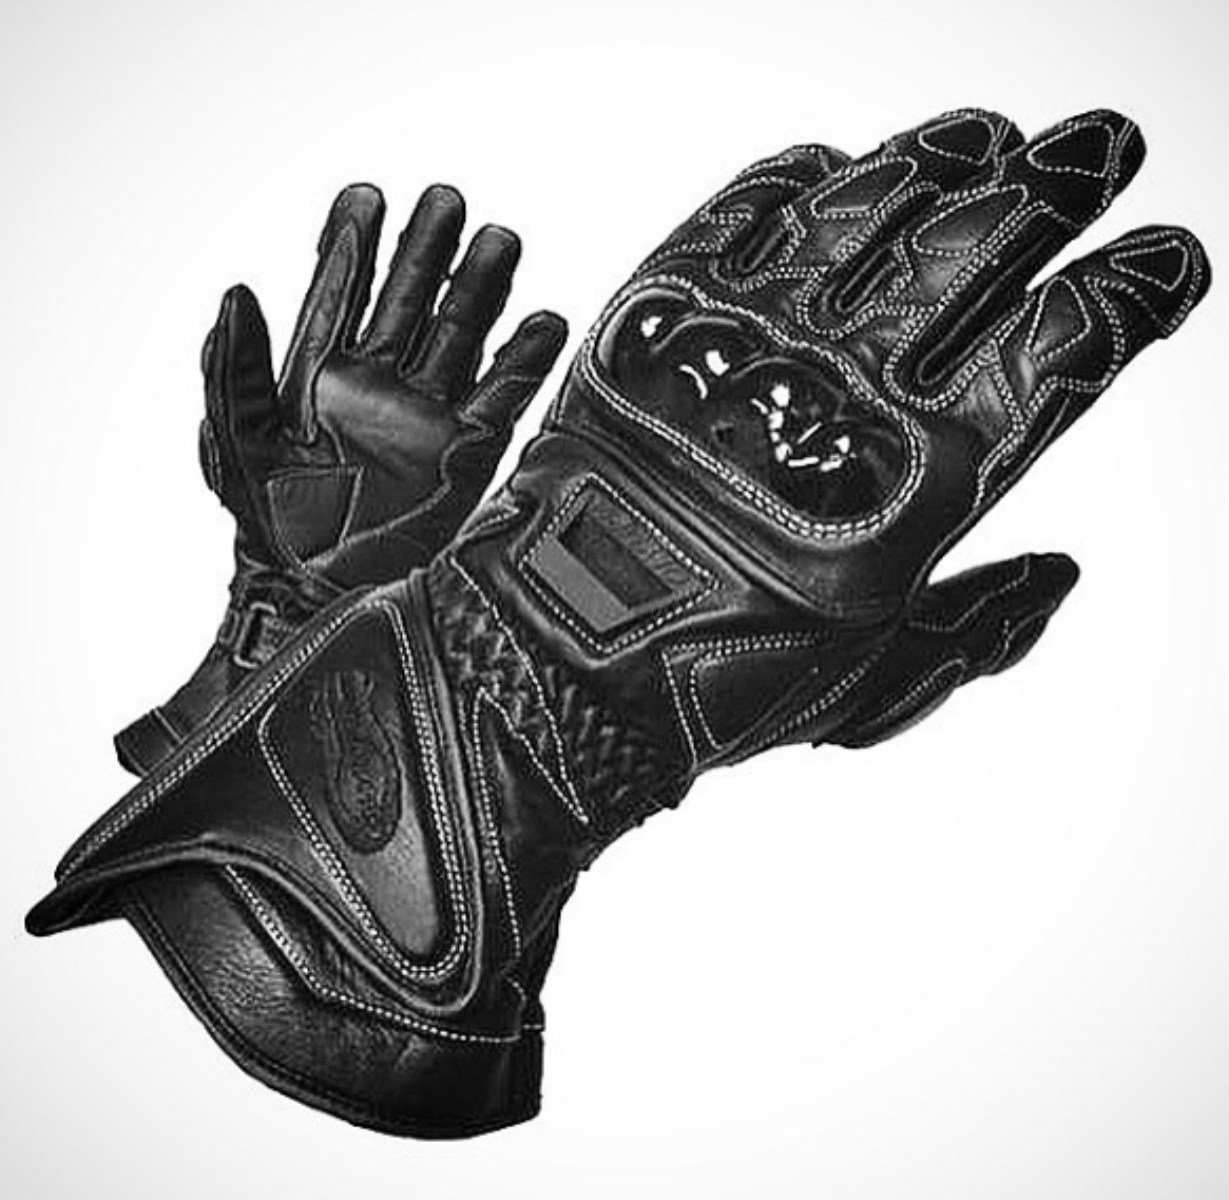 http://syntheticwarehouse.net/wp-content/uploads/2017/08/vented_protector_glove_xl.png